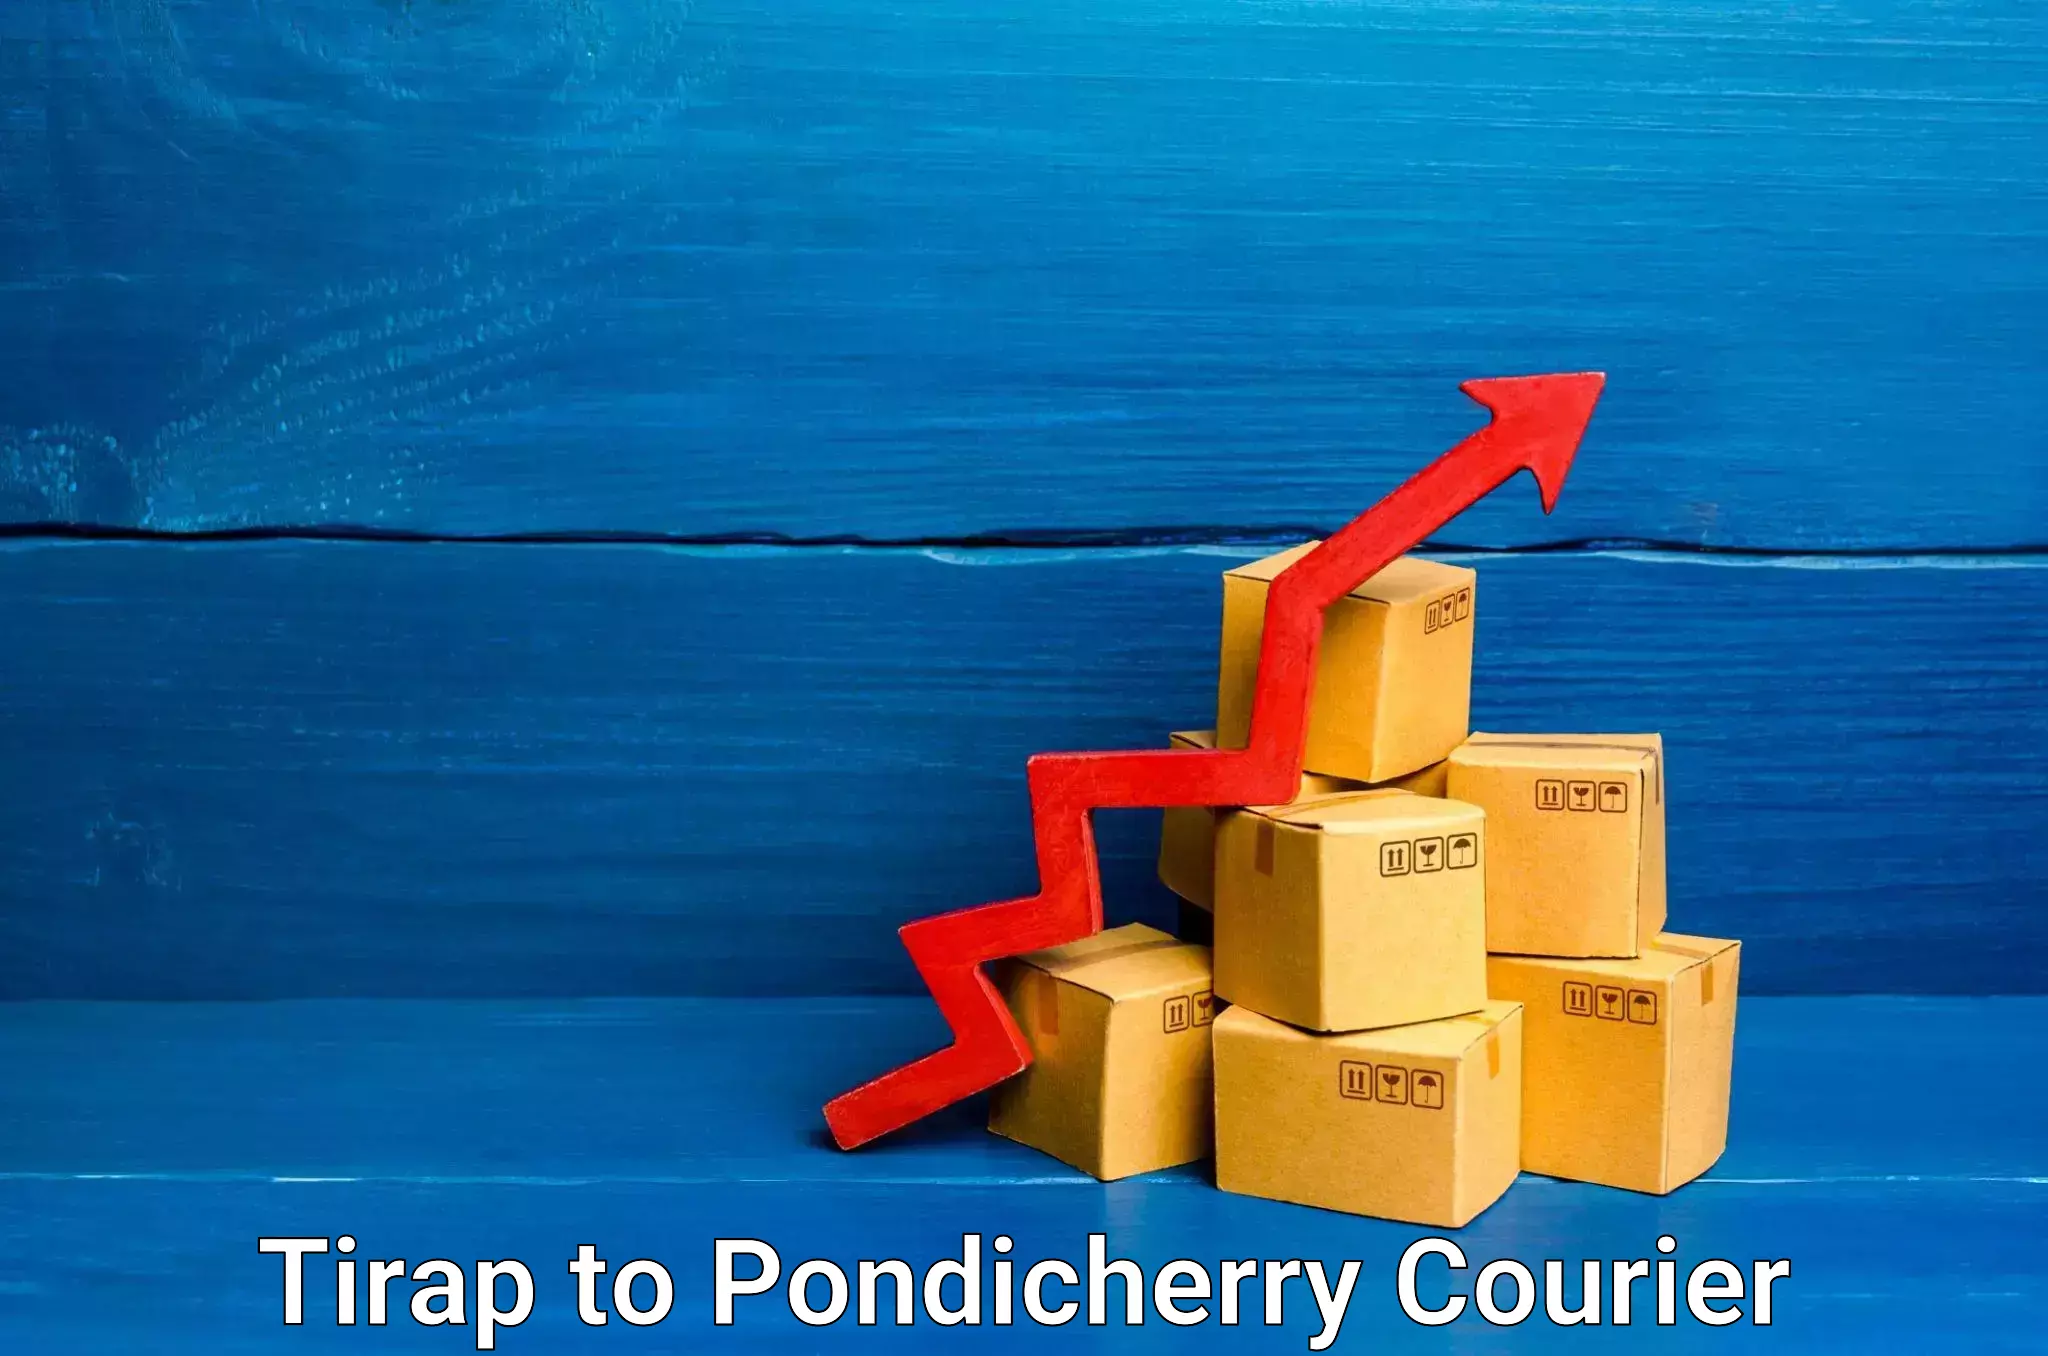 Reliable delivery network Tirap to Pondicherry